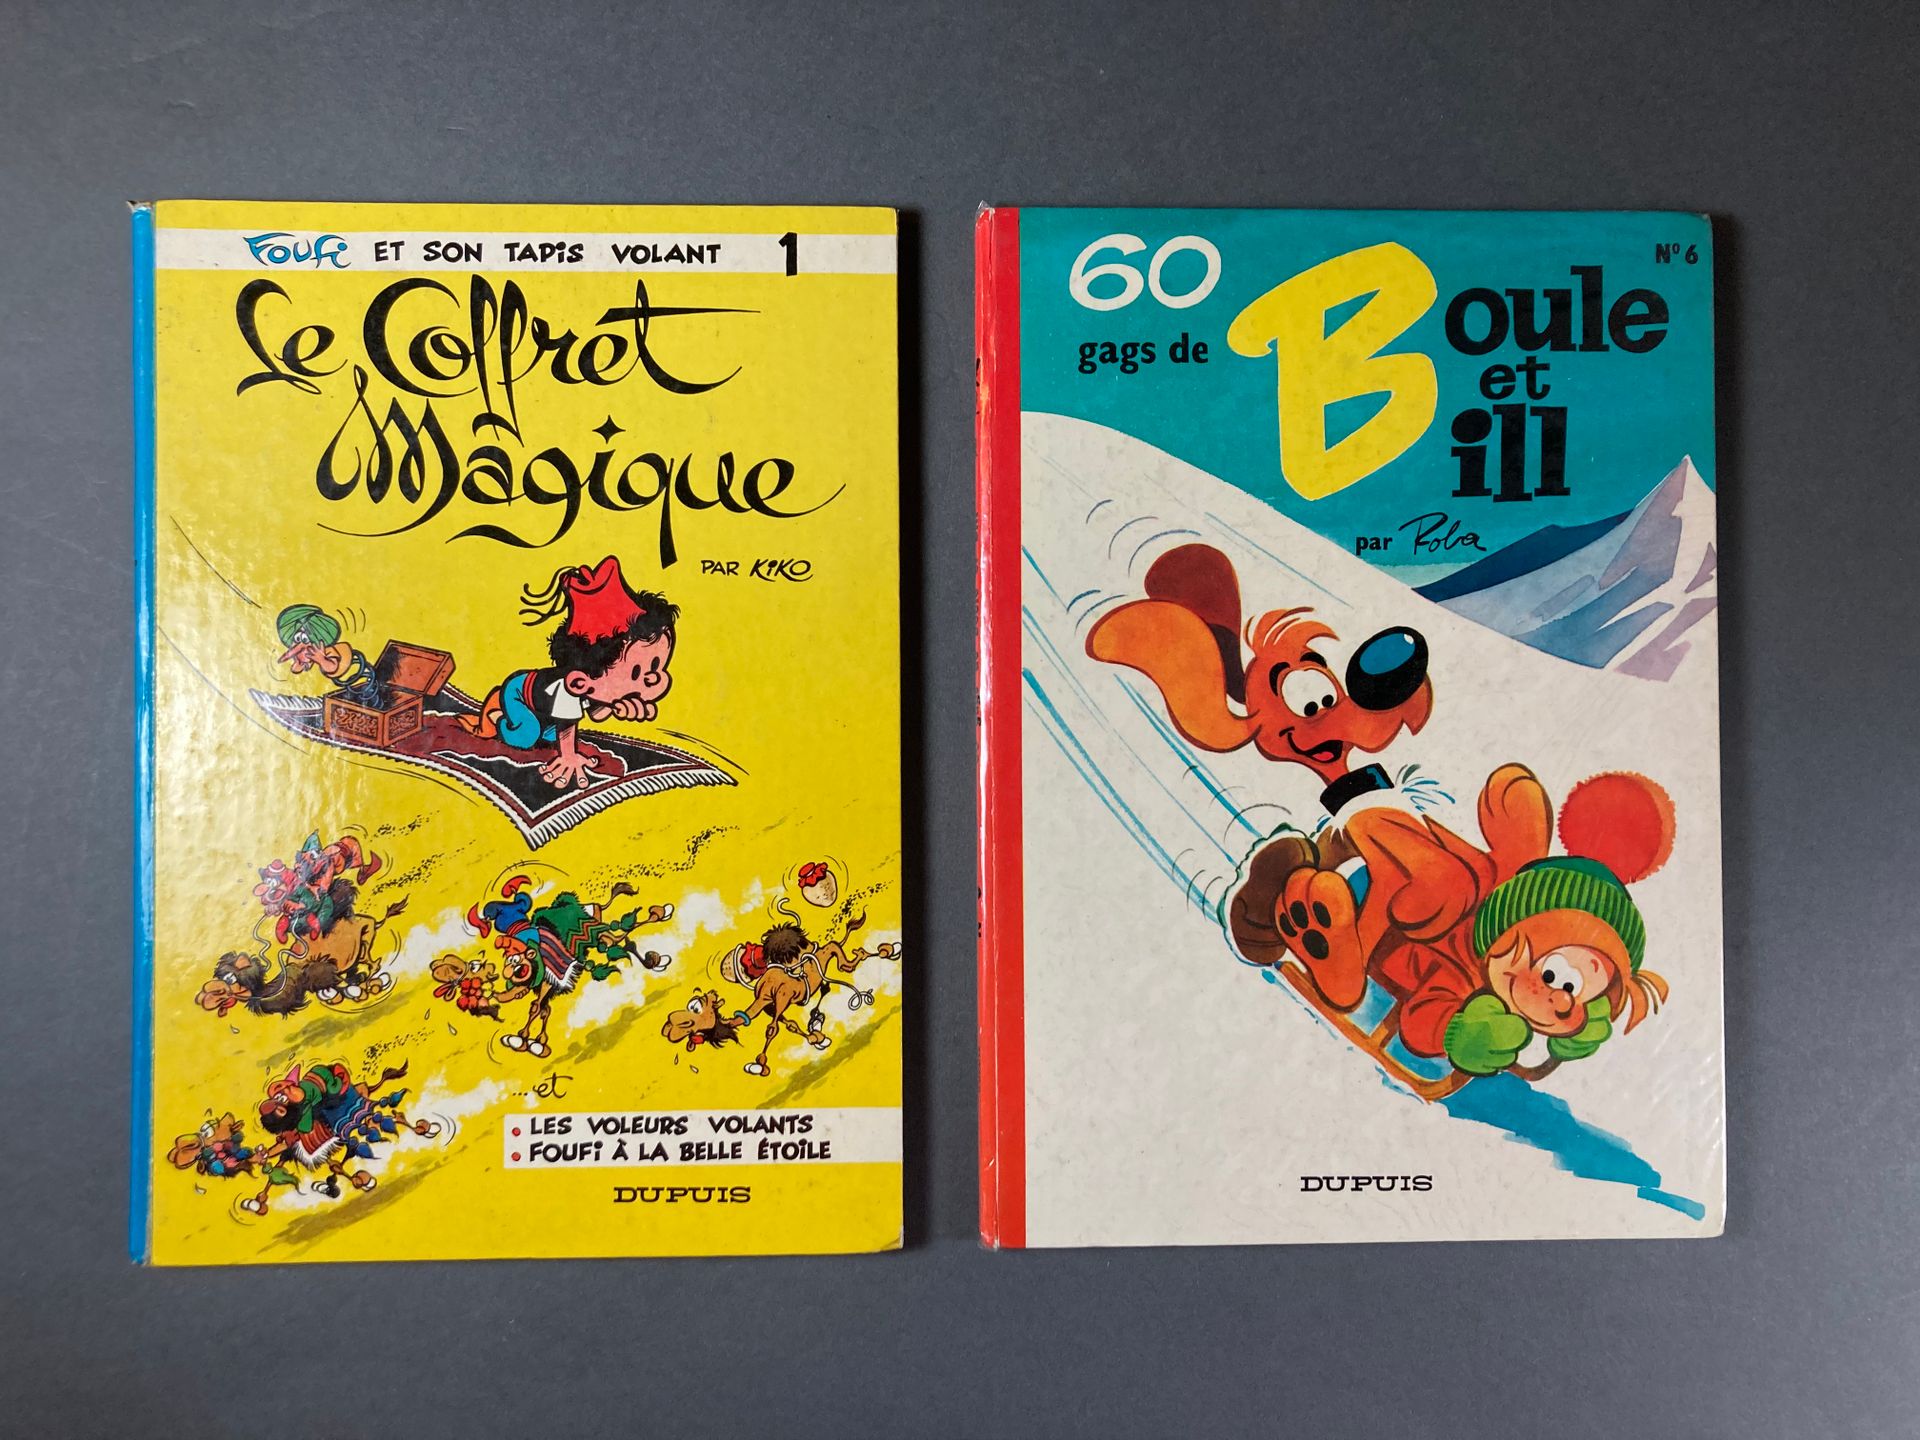 Roba & - Boule et Bill & Boule et Bill, 60 gags from, Volume 6, 1970, EO, BE, by&hellip;